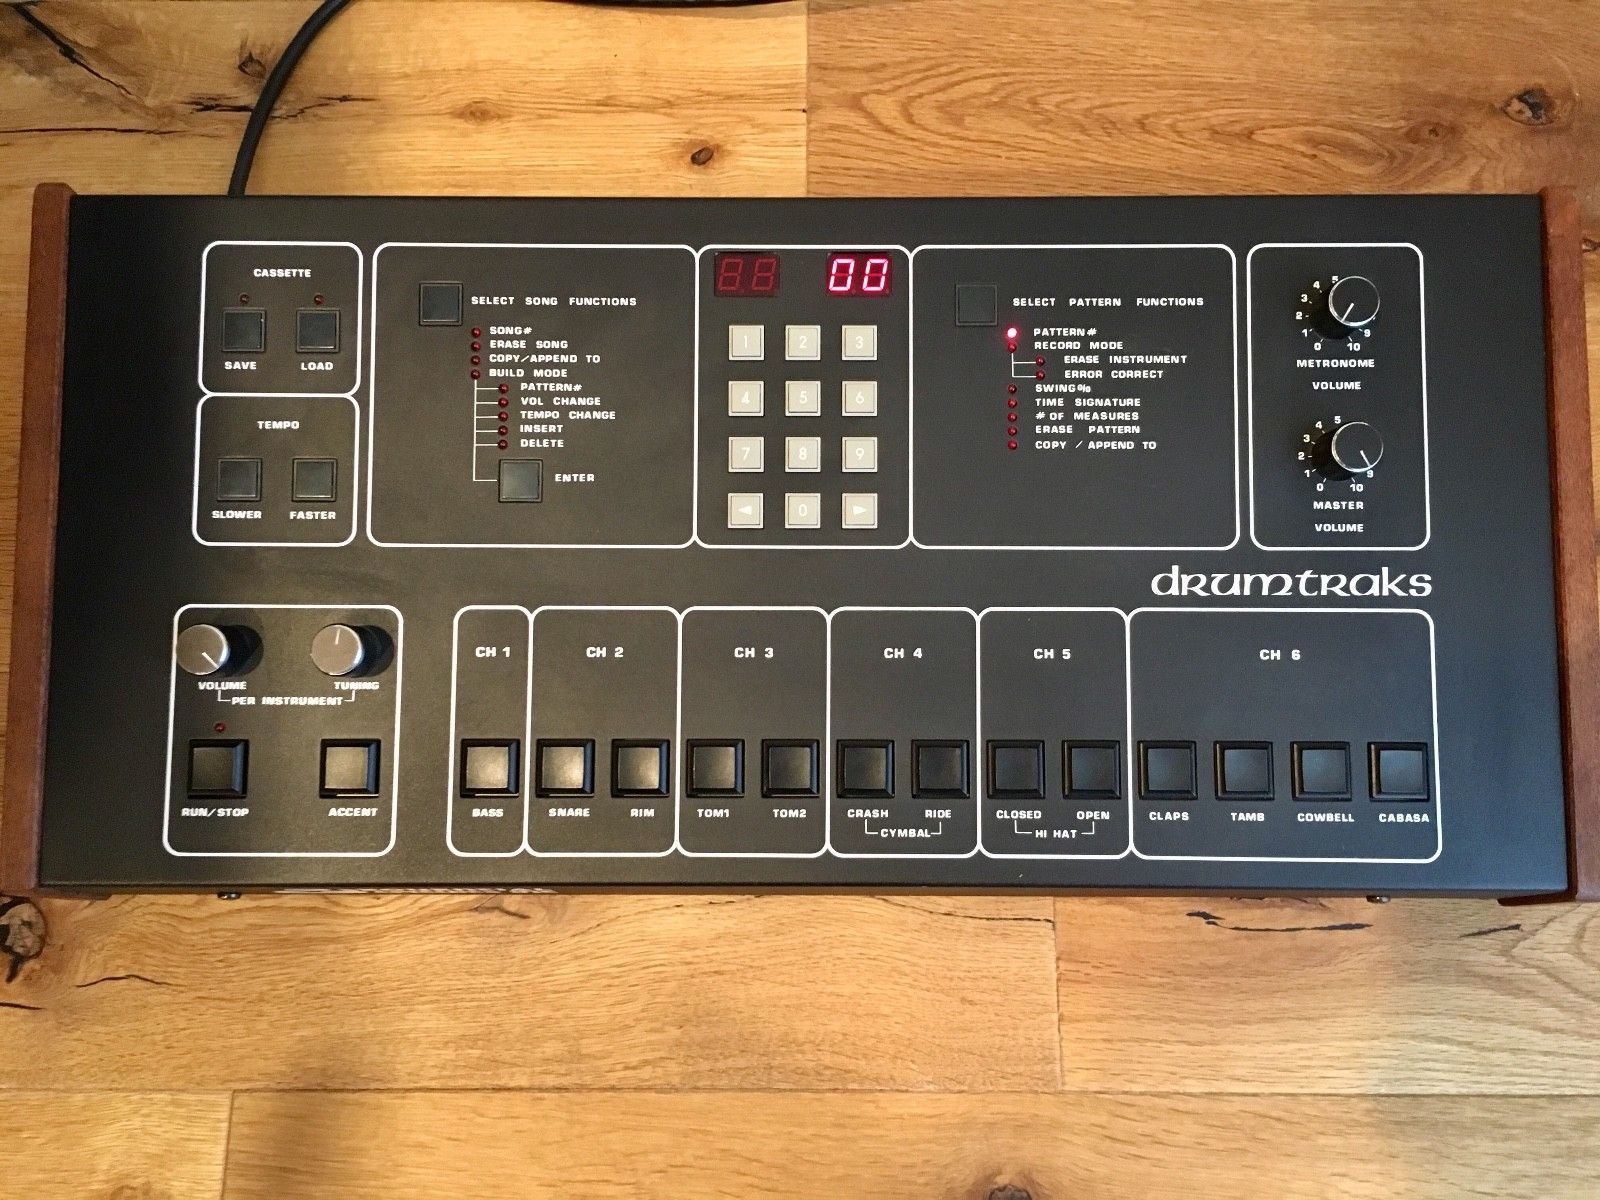 MATRIXSYNTH: Sequential Circuits Drumtraks SN 06150